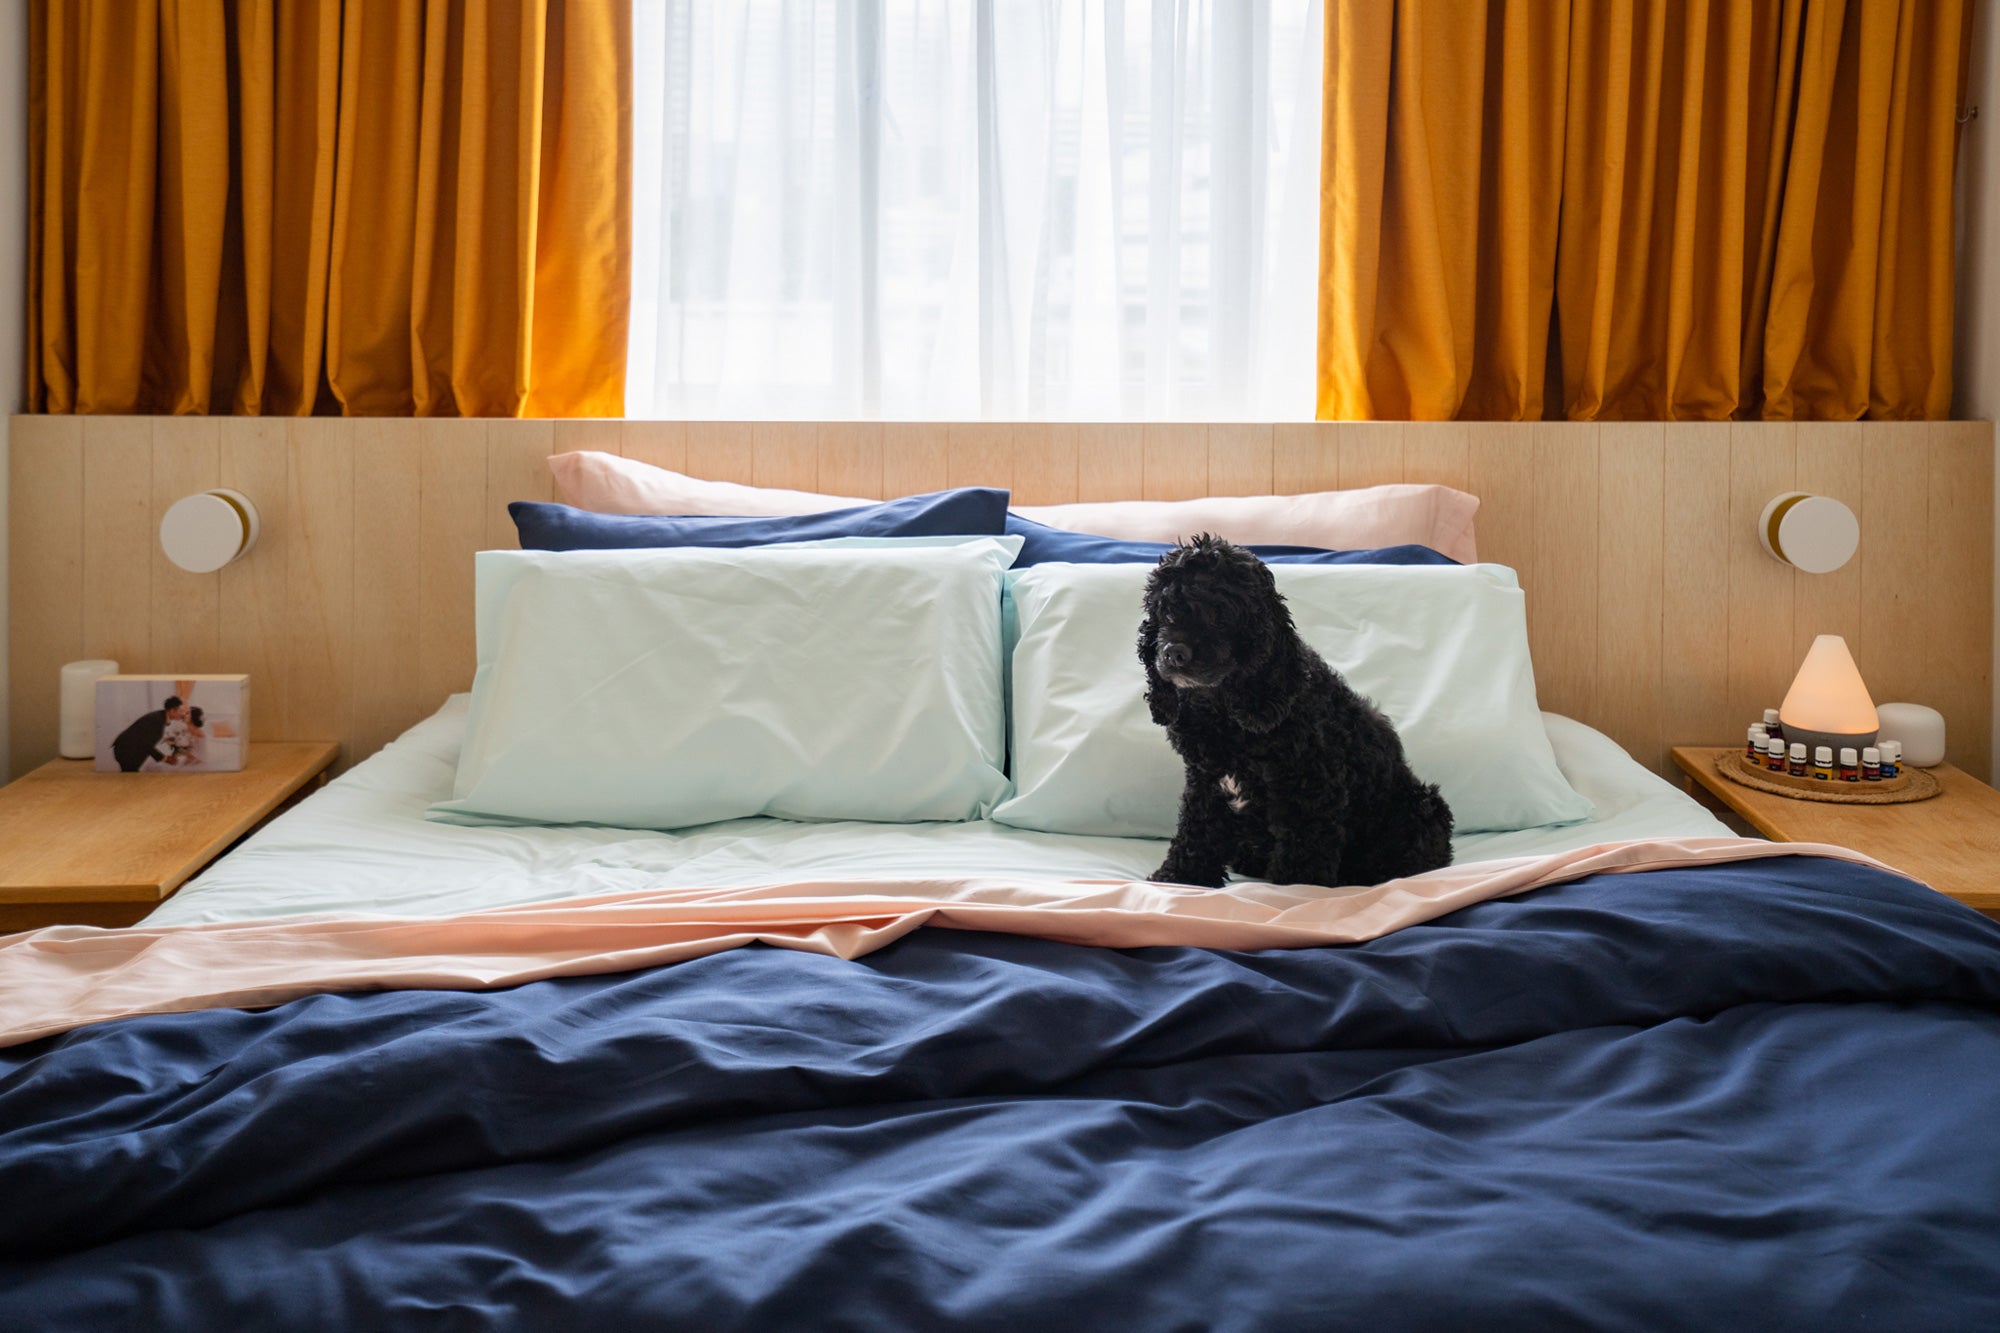 sojao organic cotton bedsheets with cute black dog